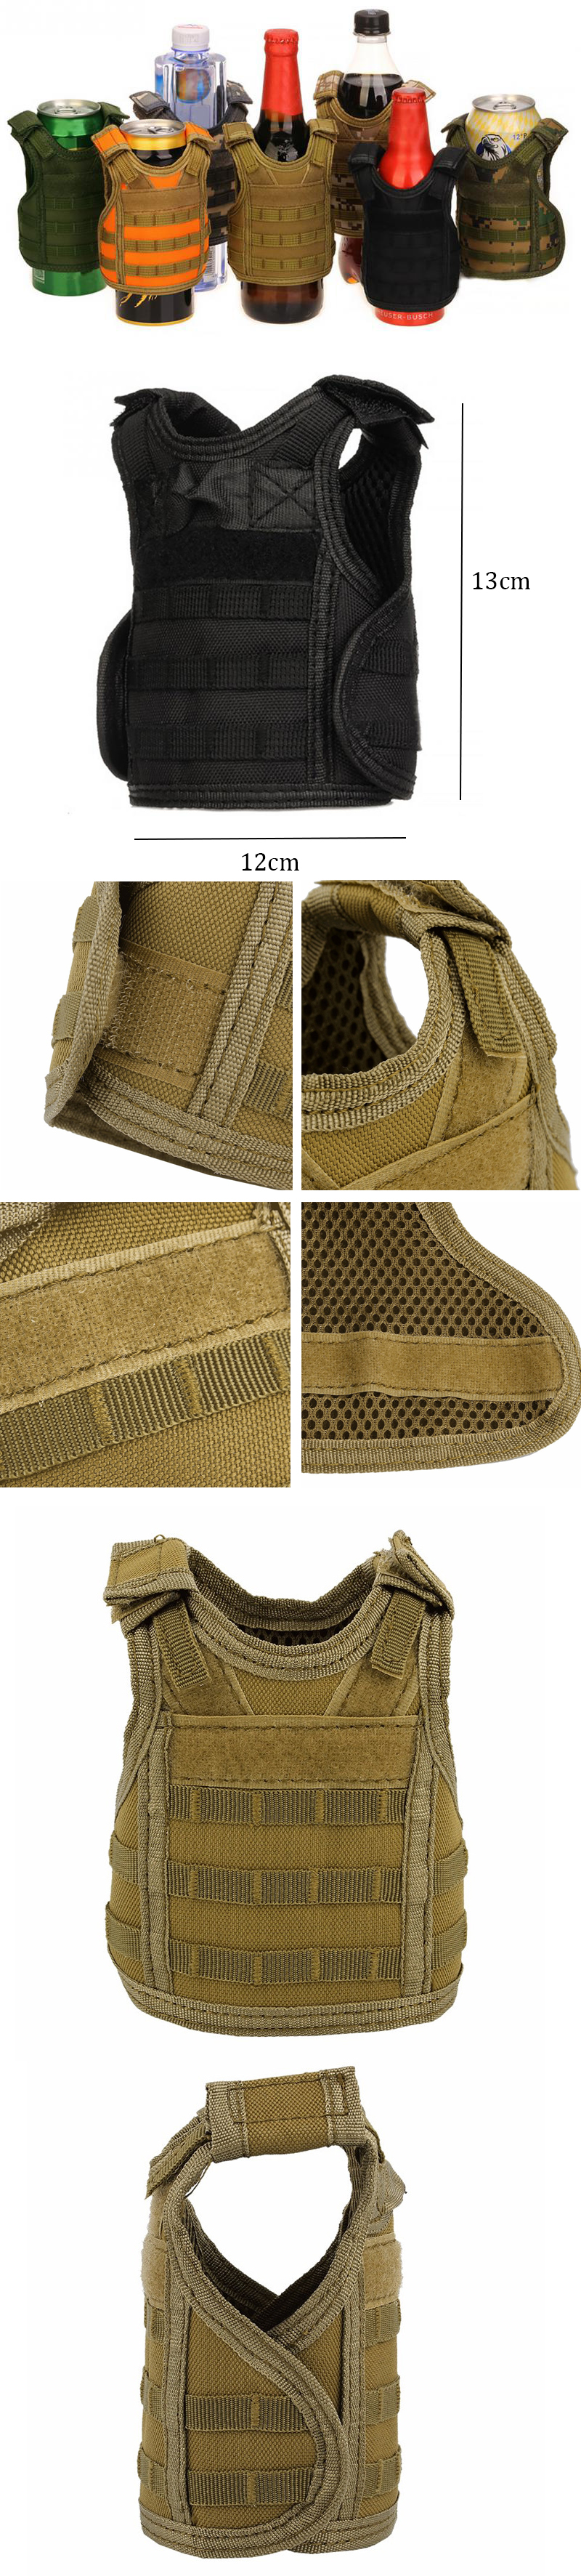 1Pcs-Tactical-Bottle-Cover-Mini-Molle-Vest-Drink-Bottle-Protector-Holster-For-Outdoor-Sports-1406055-1